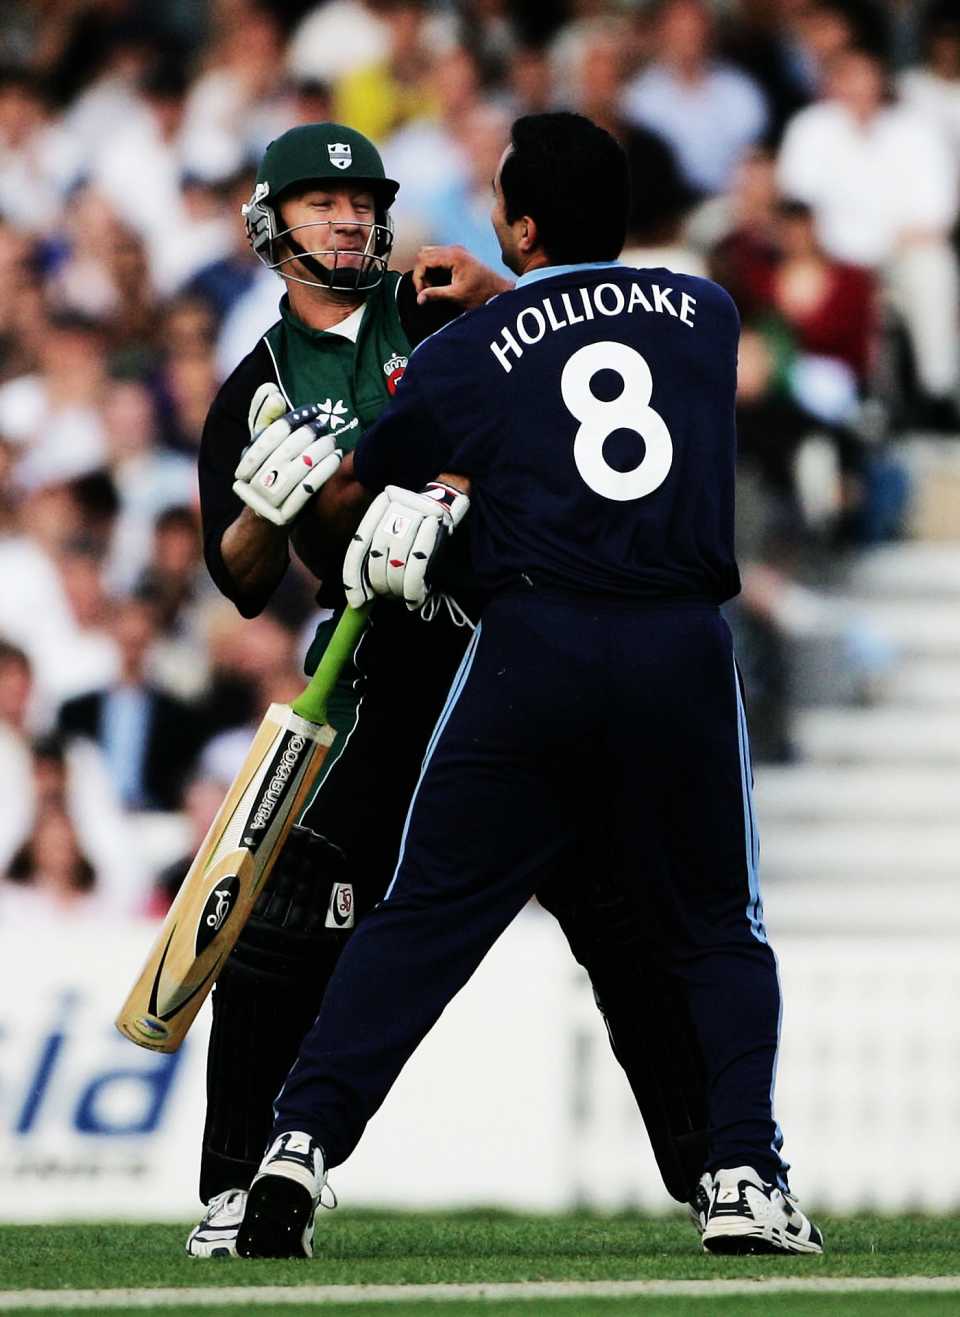 Andy Bichel and Adam Hollioake have a playful punch-up, Surrey v Worcestershire, Twenty20 Cup, The Oval, July 19, 2004